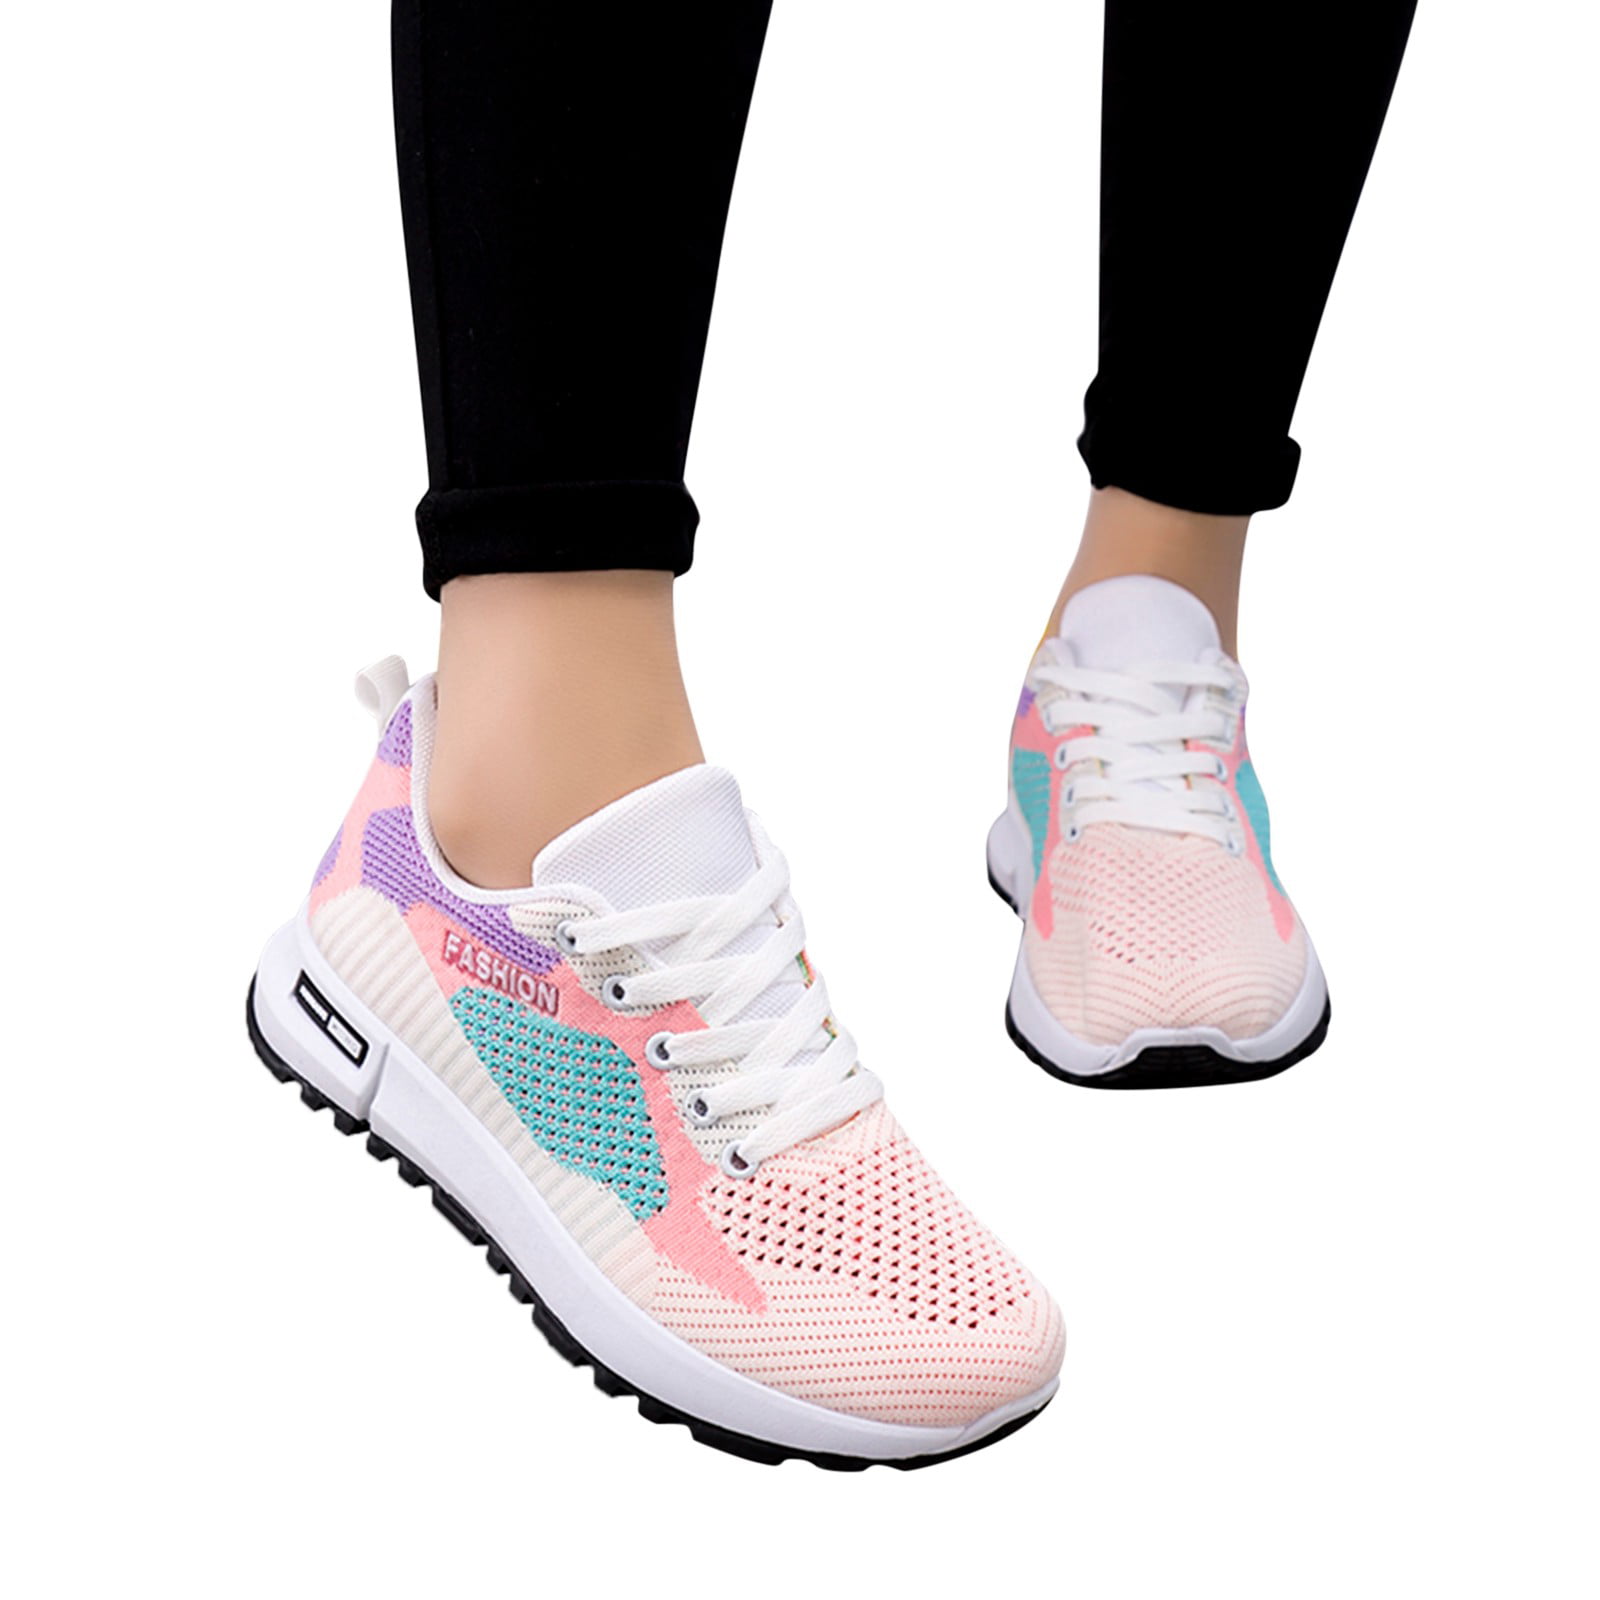 Ruikar Ladies Shoes Fashion Comfortable Mesh Breathable Lace Up Casual Sneakers Women's Sneakers with Arch Support Leopard Sneakers for Women Size 8